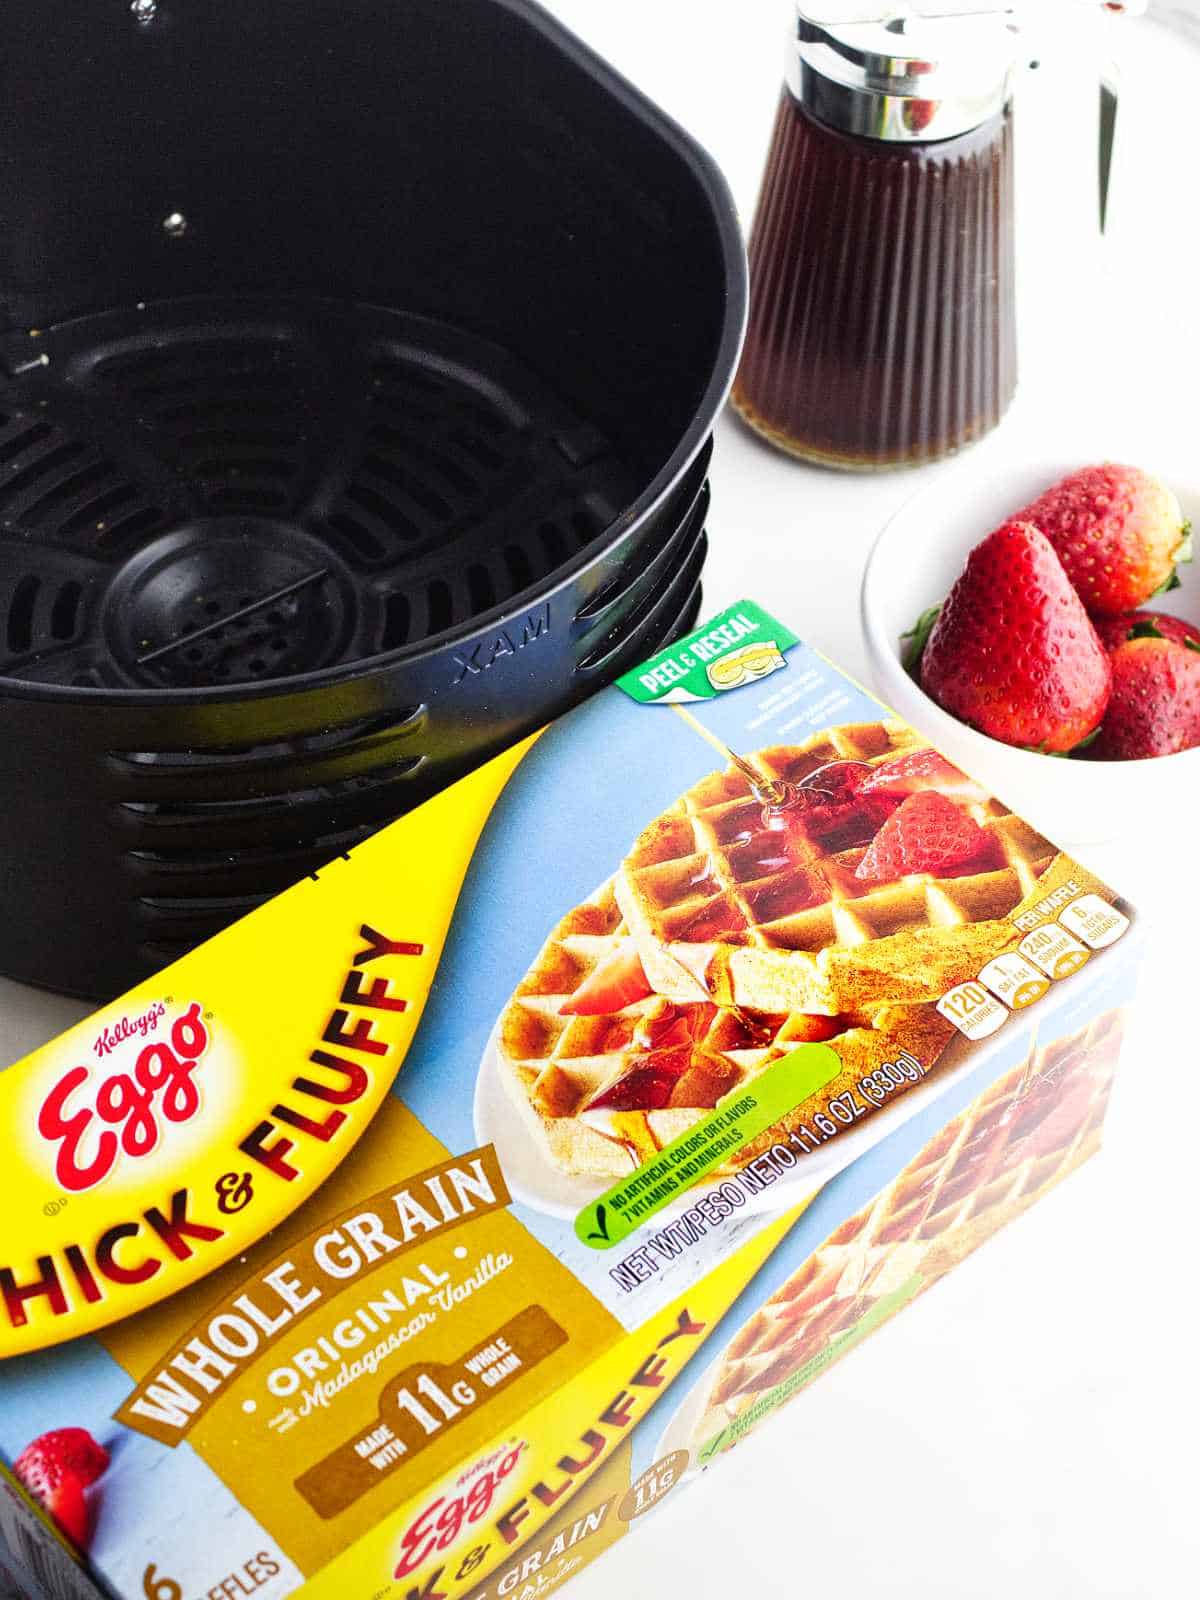 Eggo waffles, air fryer basket, strawberries, and maple syrup on a white background.